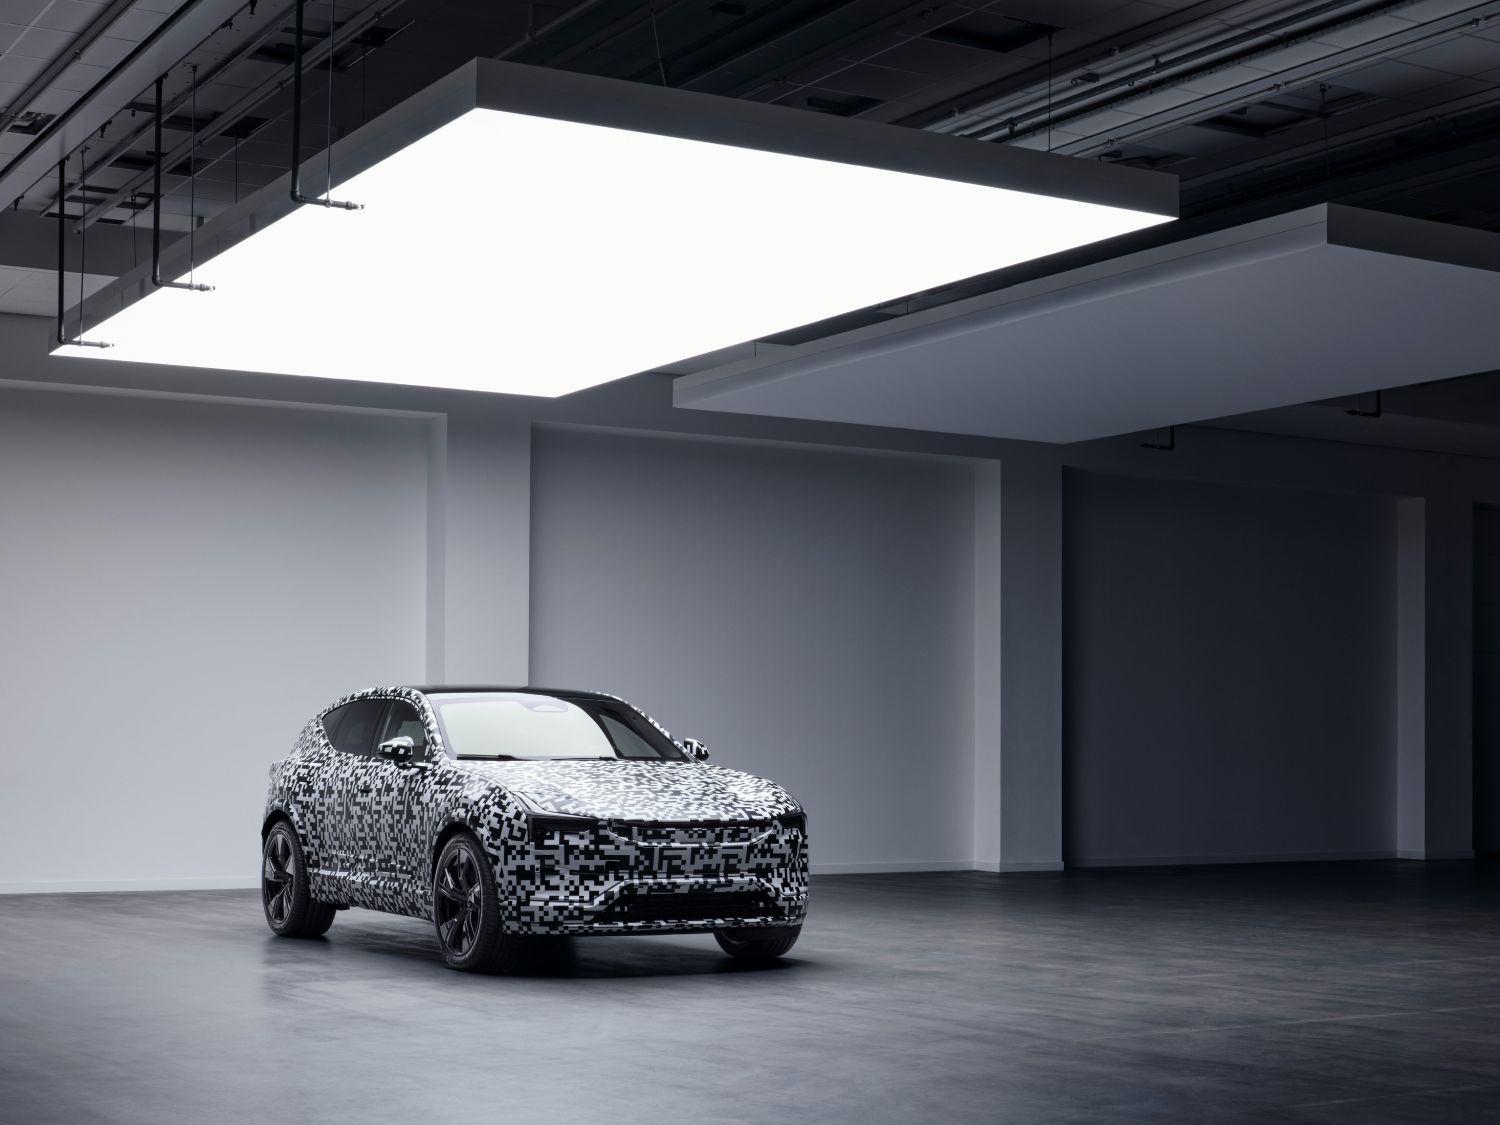 A Polestar 3 prototype on display in an empty room.